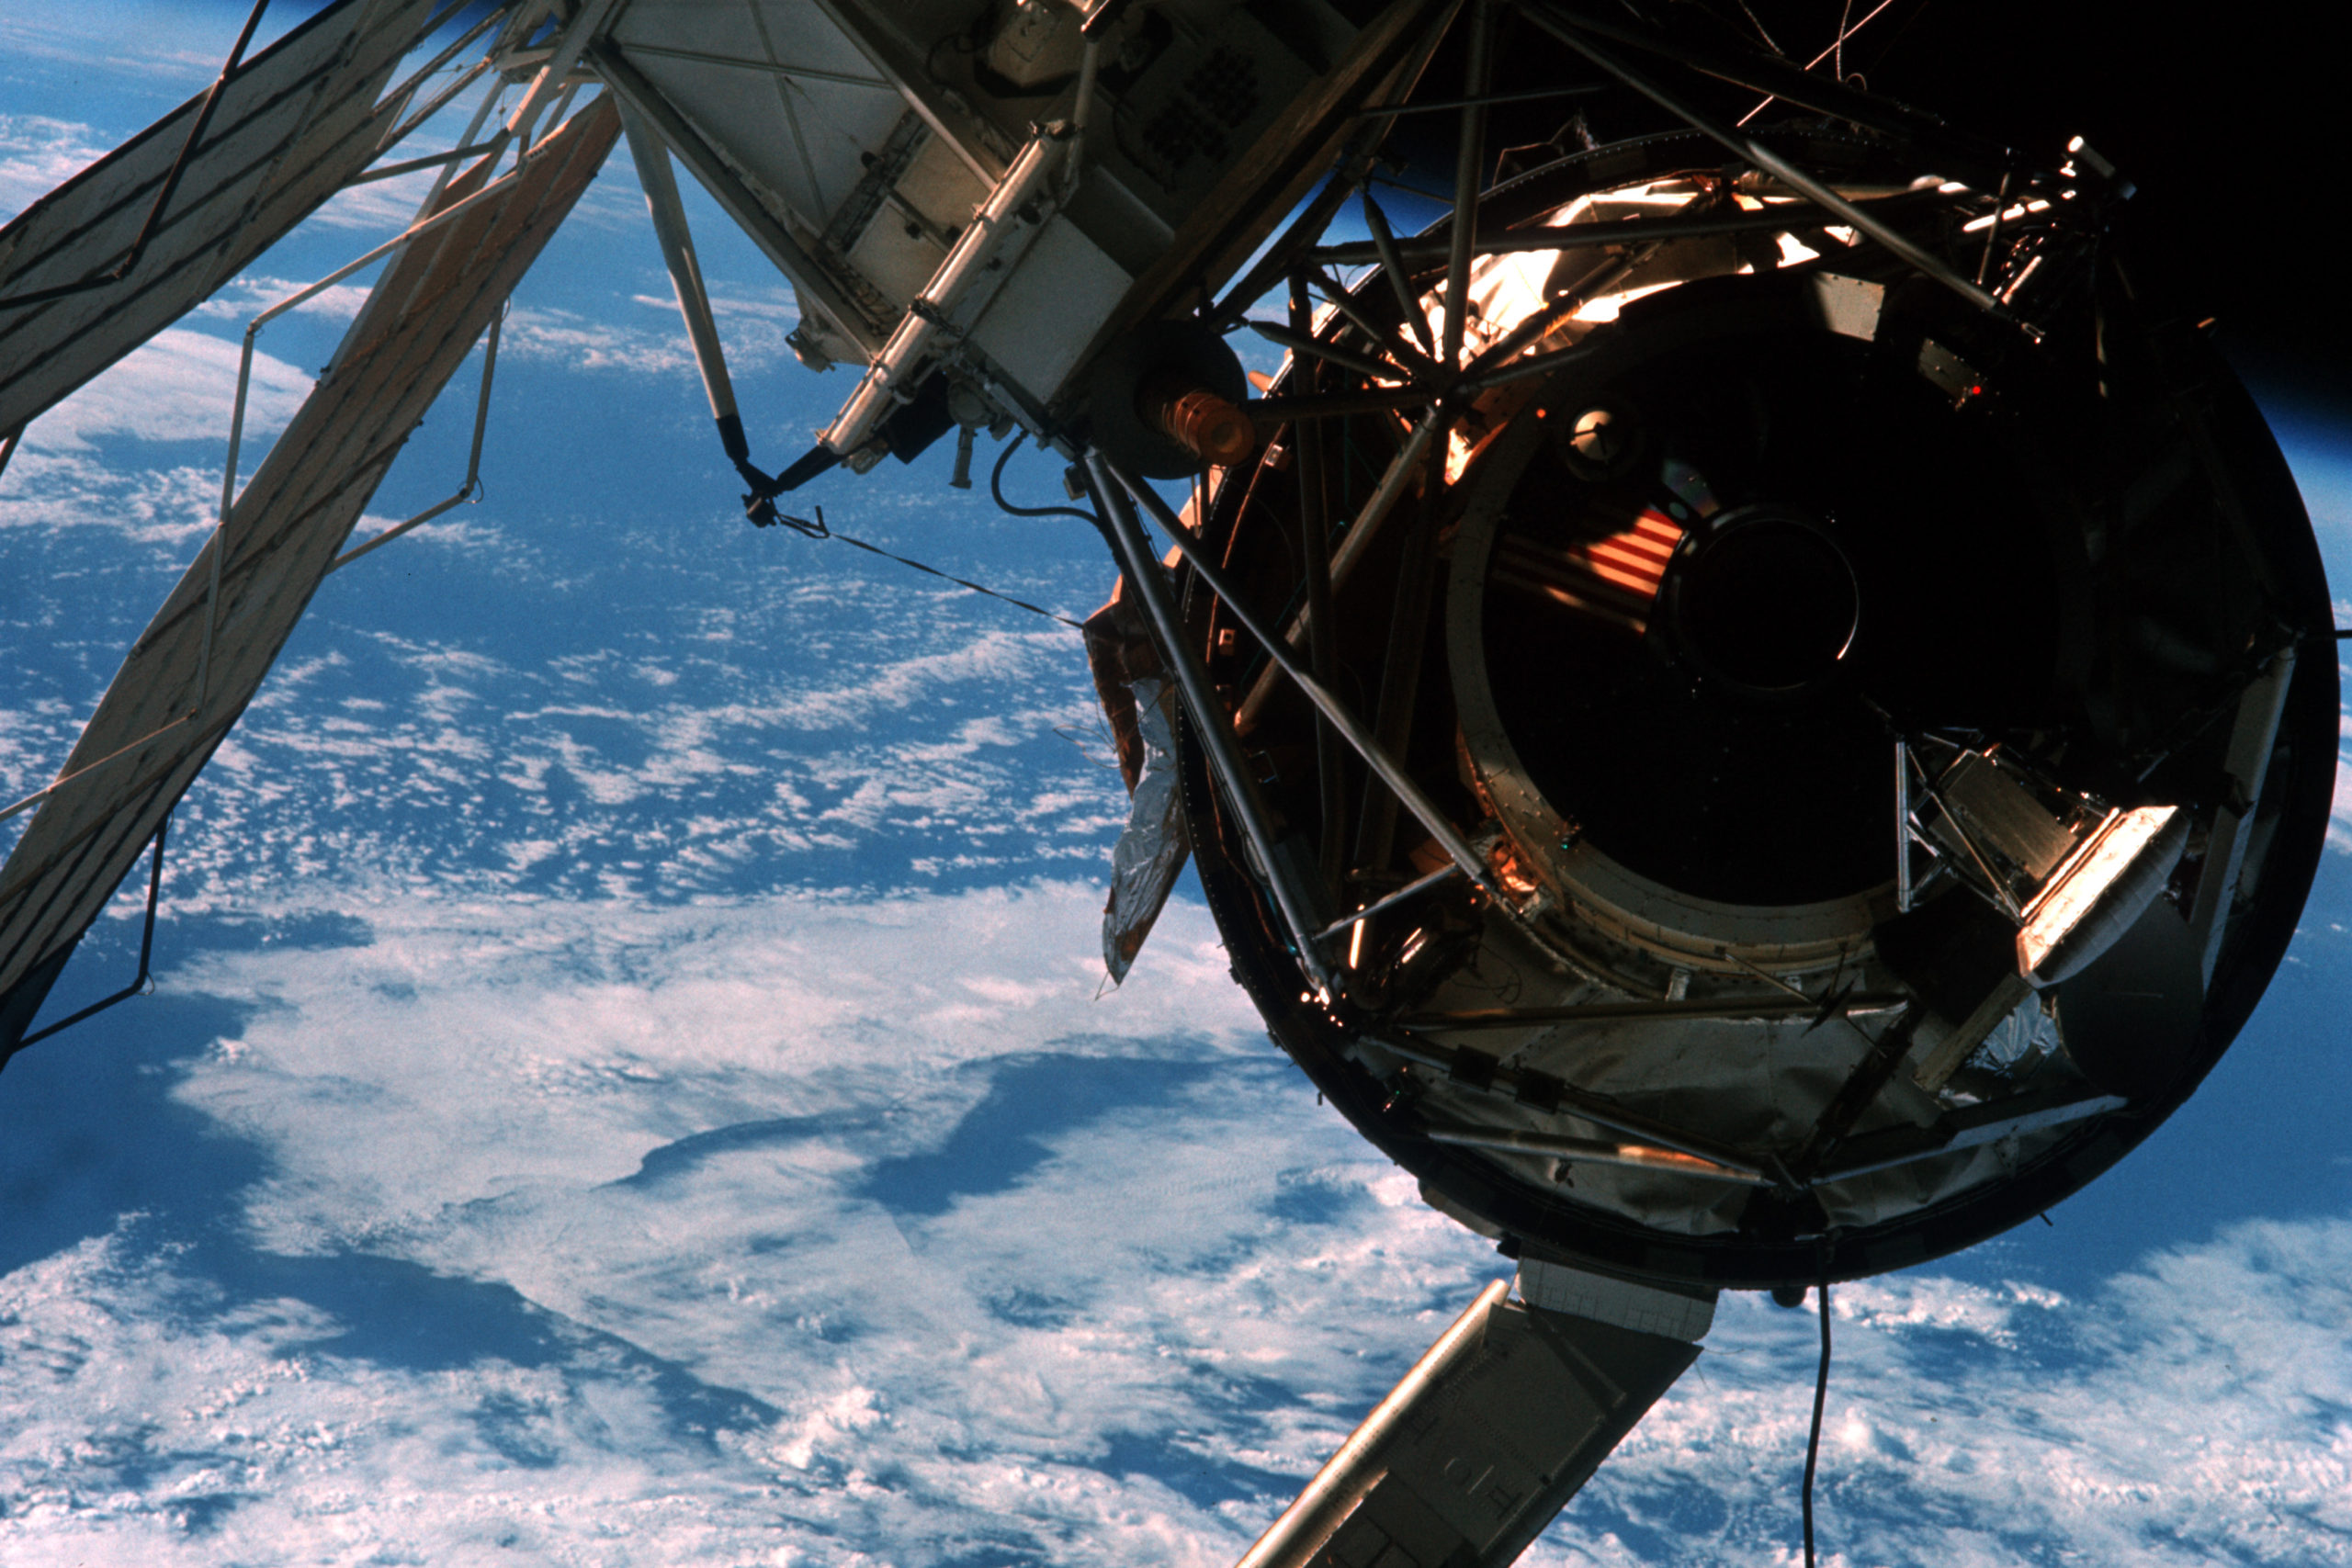 Tally-Ho the Skylab': The Mission to Save America's Space Station, 45 Years On - AmericaSpace